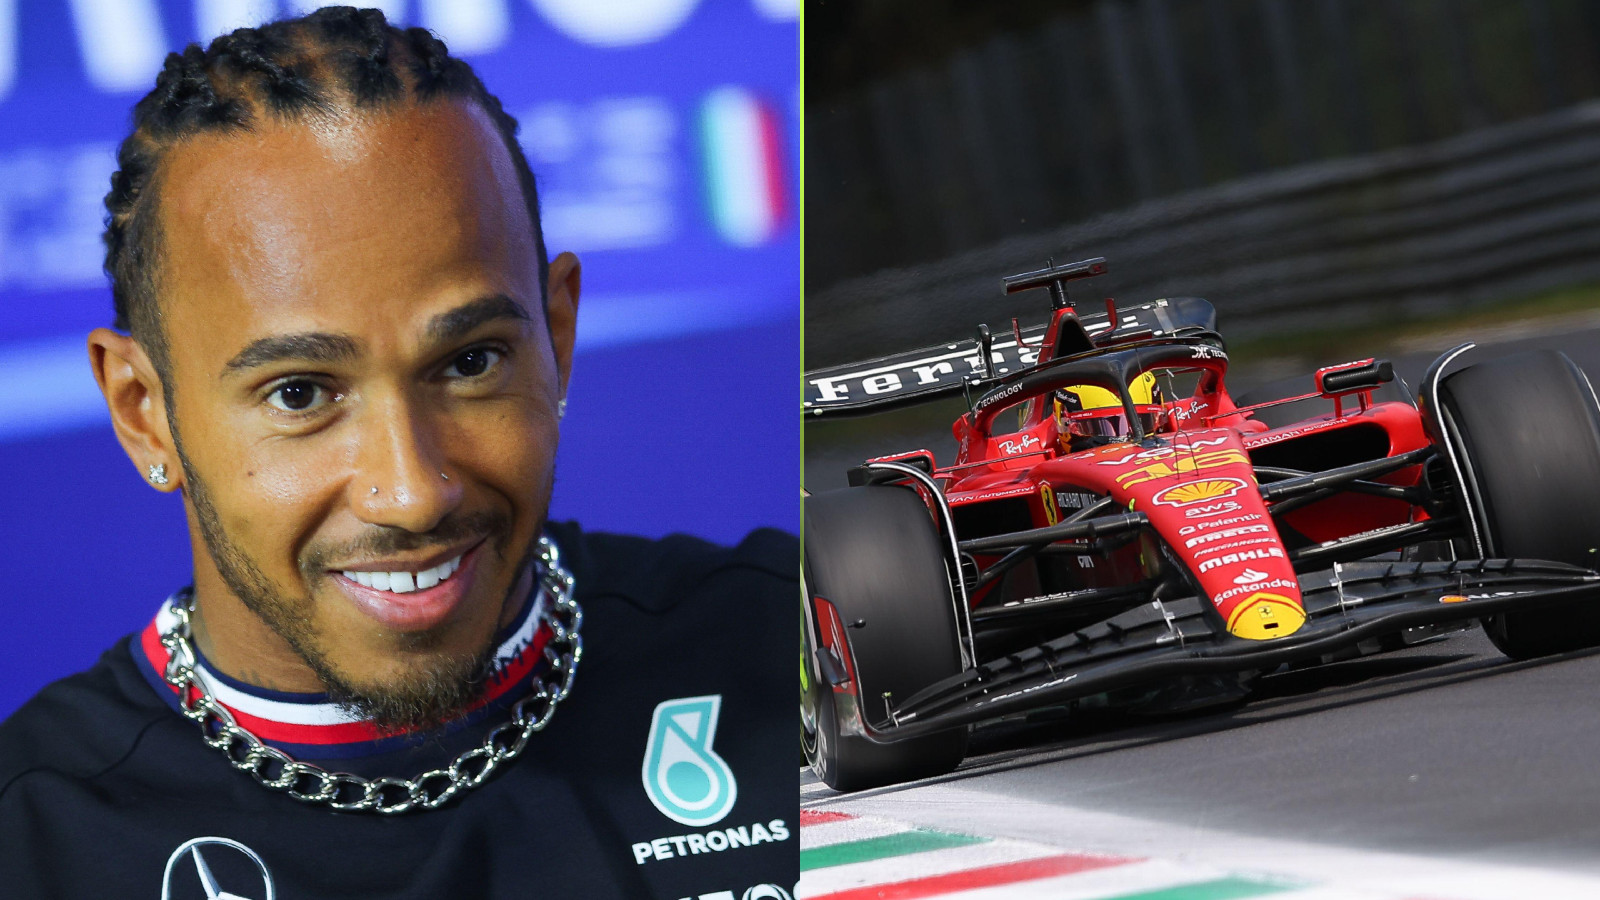 F1 News: Lewis Hamilton Hinted At Ferrari Move - Wondered What It Would Be  Like In Red - F1 Briefings: Formula 1 News, Rumors, Standings and More